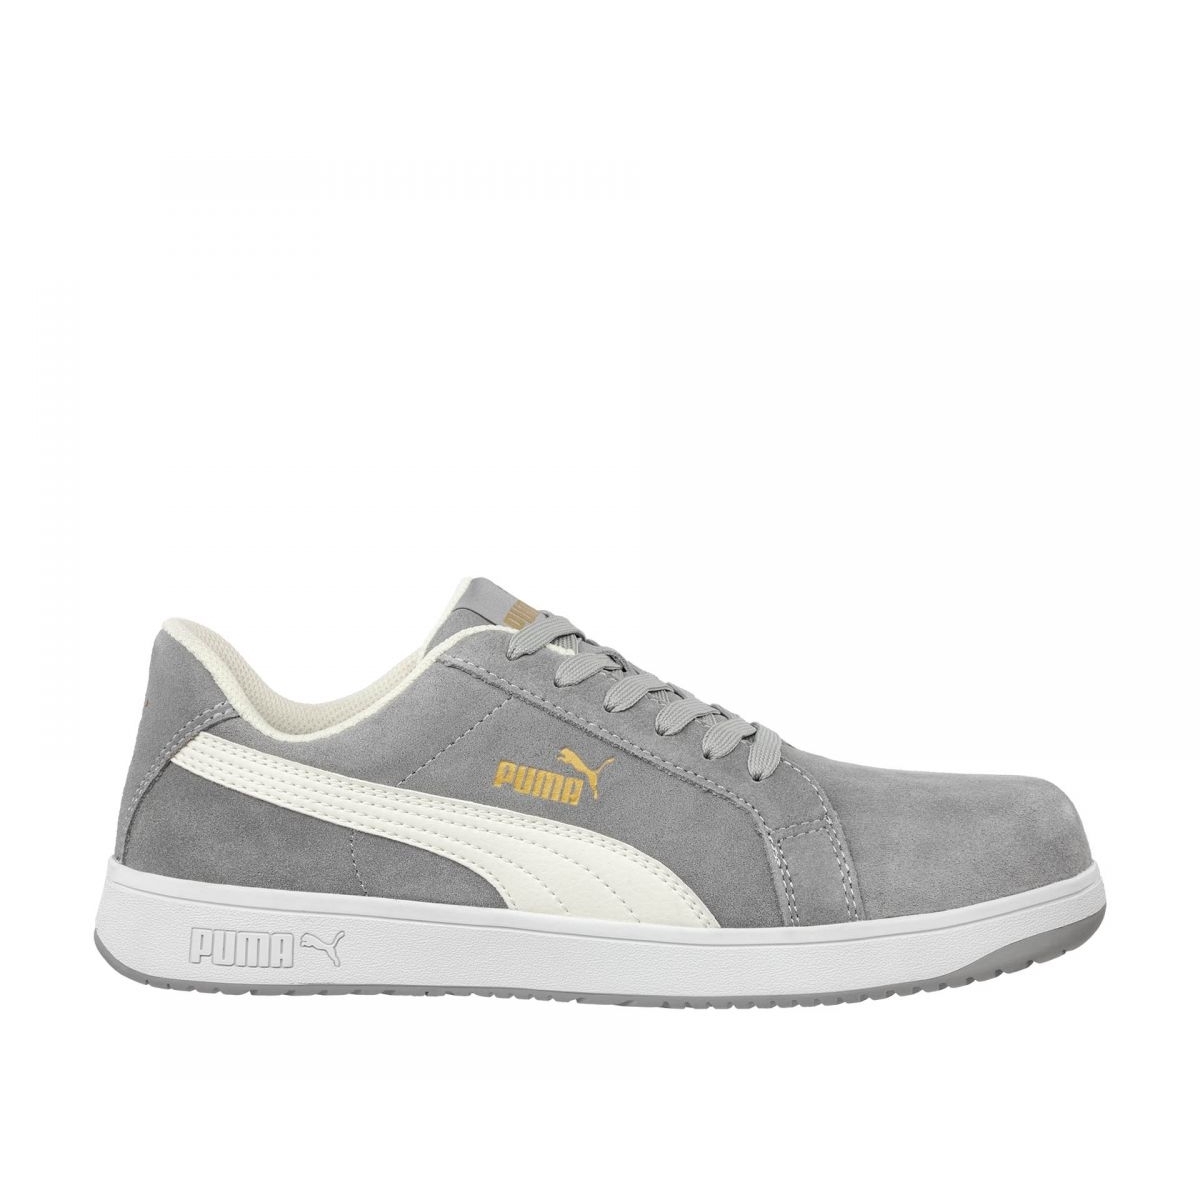 PUMA Safety Men's Iconic Low Composite Toe SD Work Shoes Grey Suede - 640035 Grey - Grey, 10